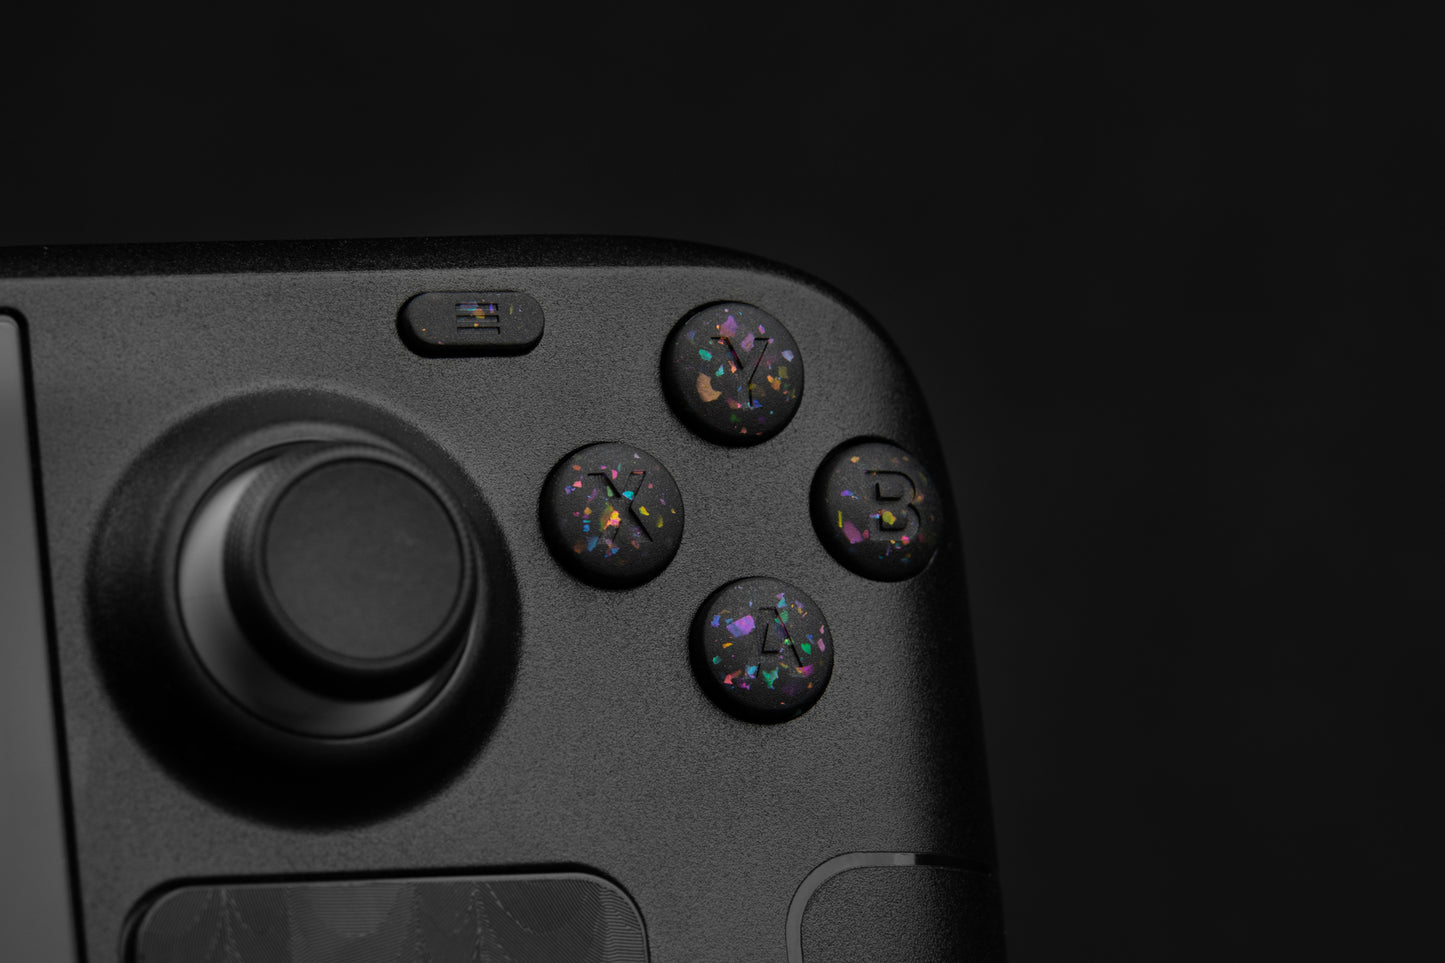 Close up abxy installed on steam deck. Party black metallic shards of color mixed into black buttons. 